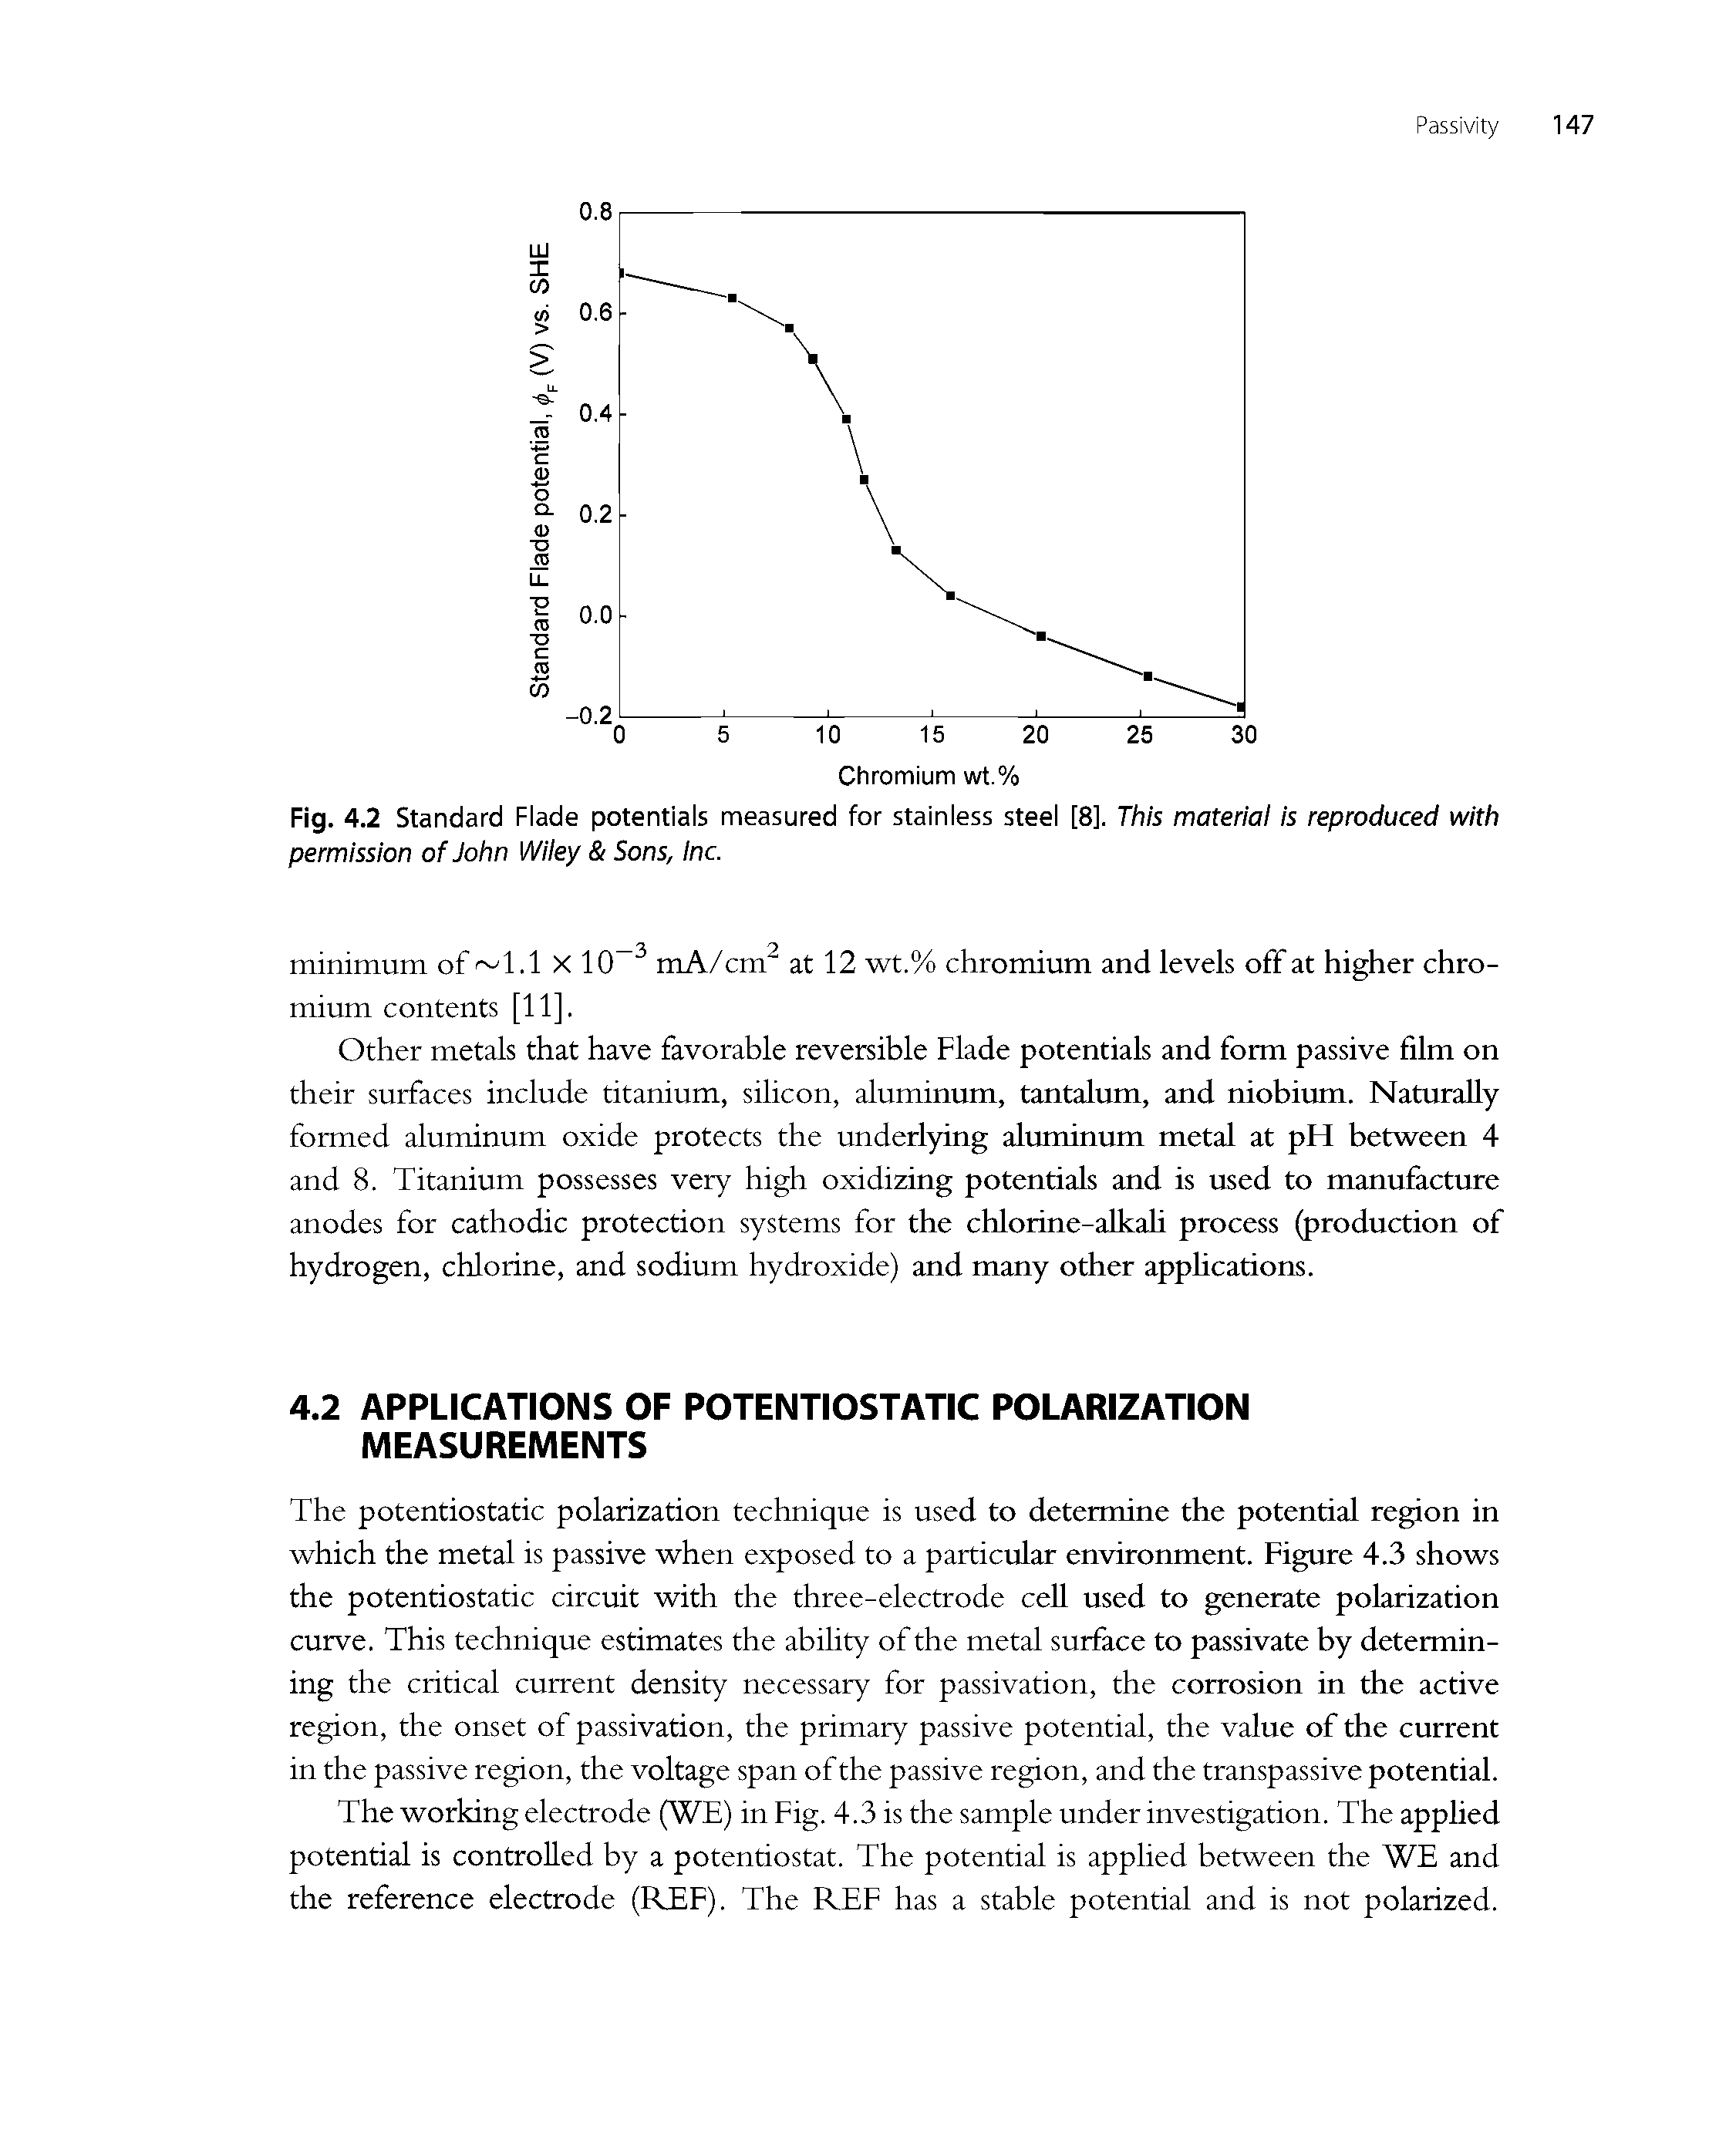 Fig. 4.2 Standard Flade potentials measured for stainless steel [8], This material is reproduced with permission of John Wiley Sons, Inc.